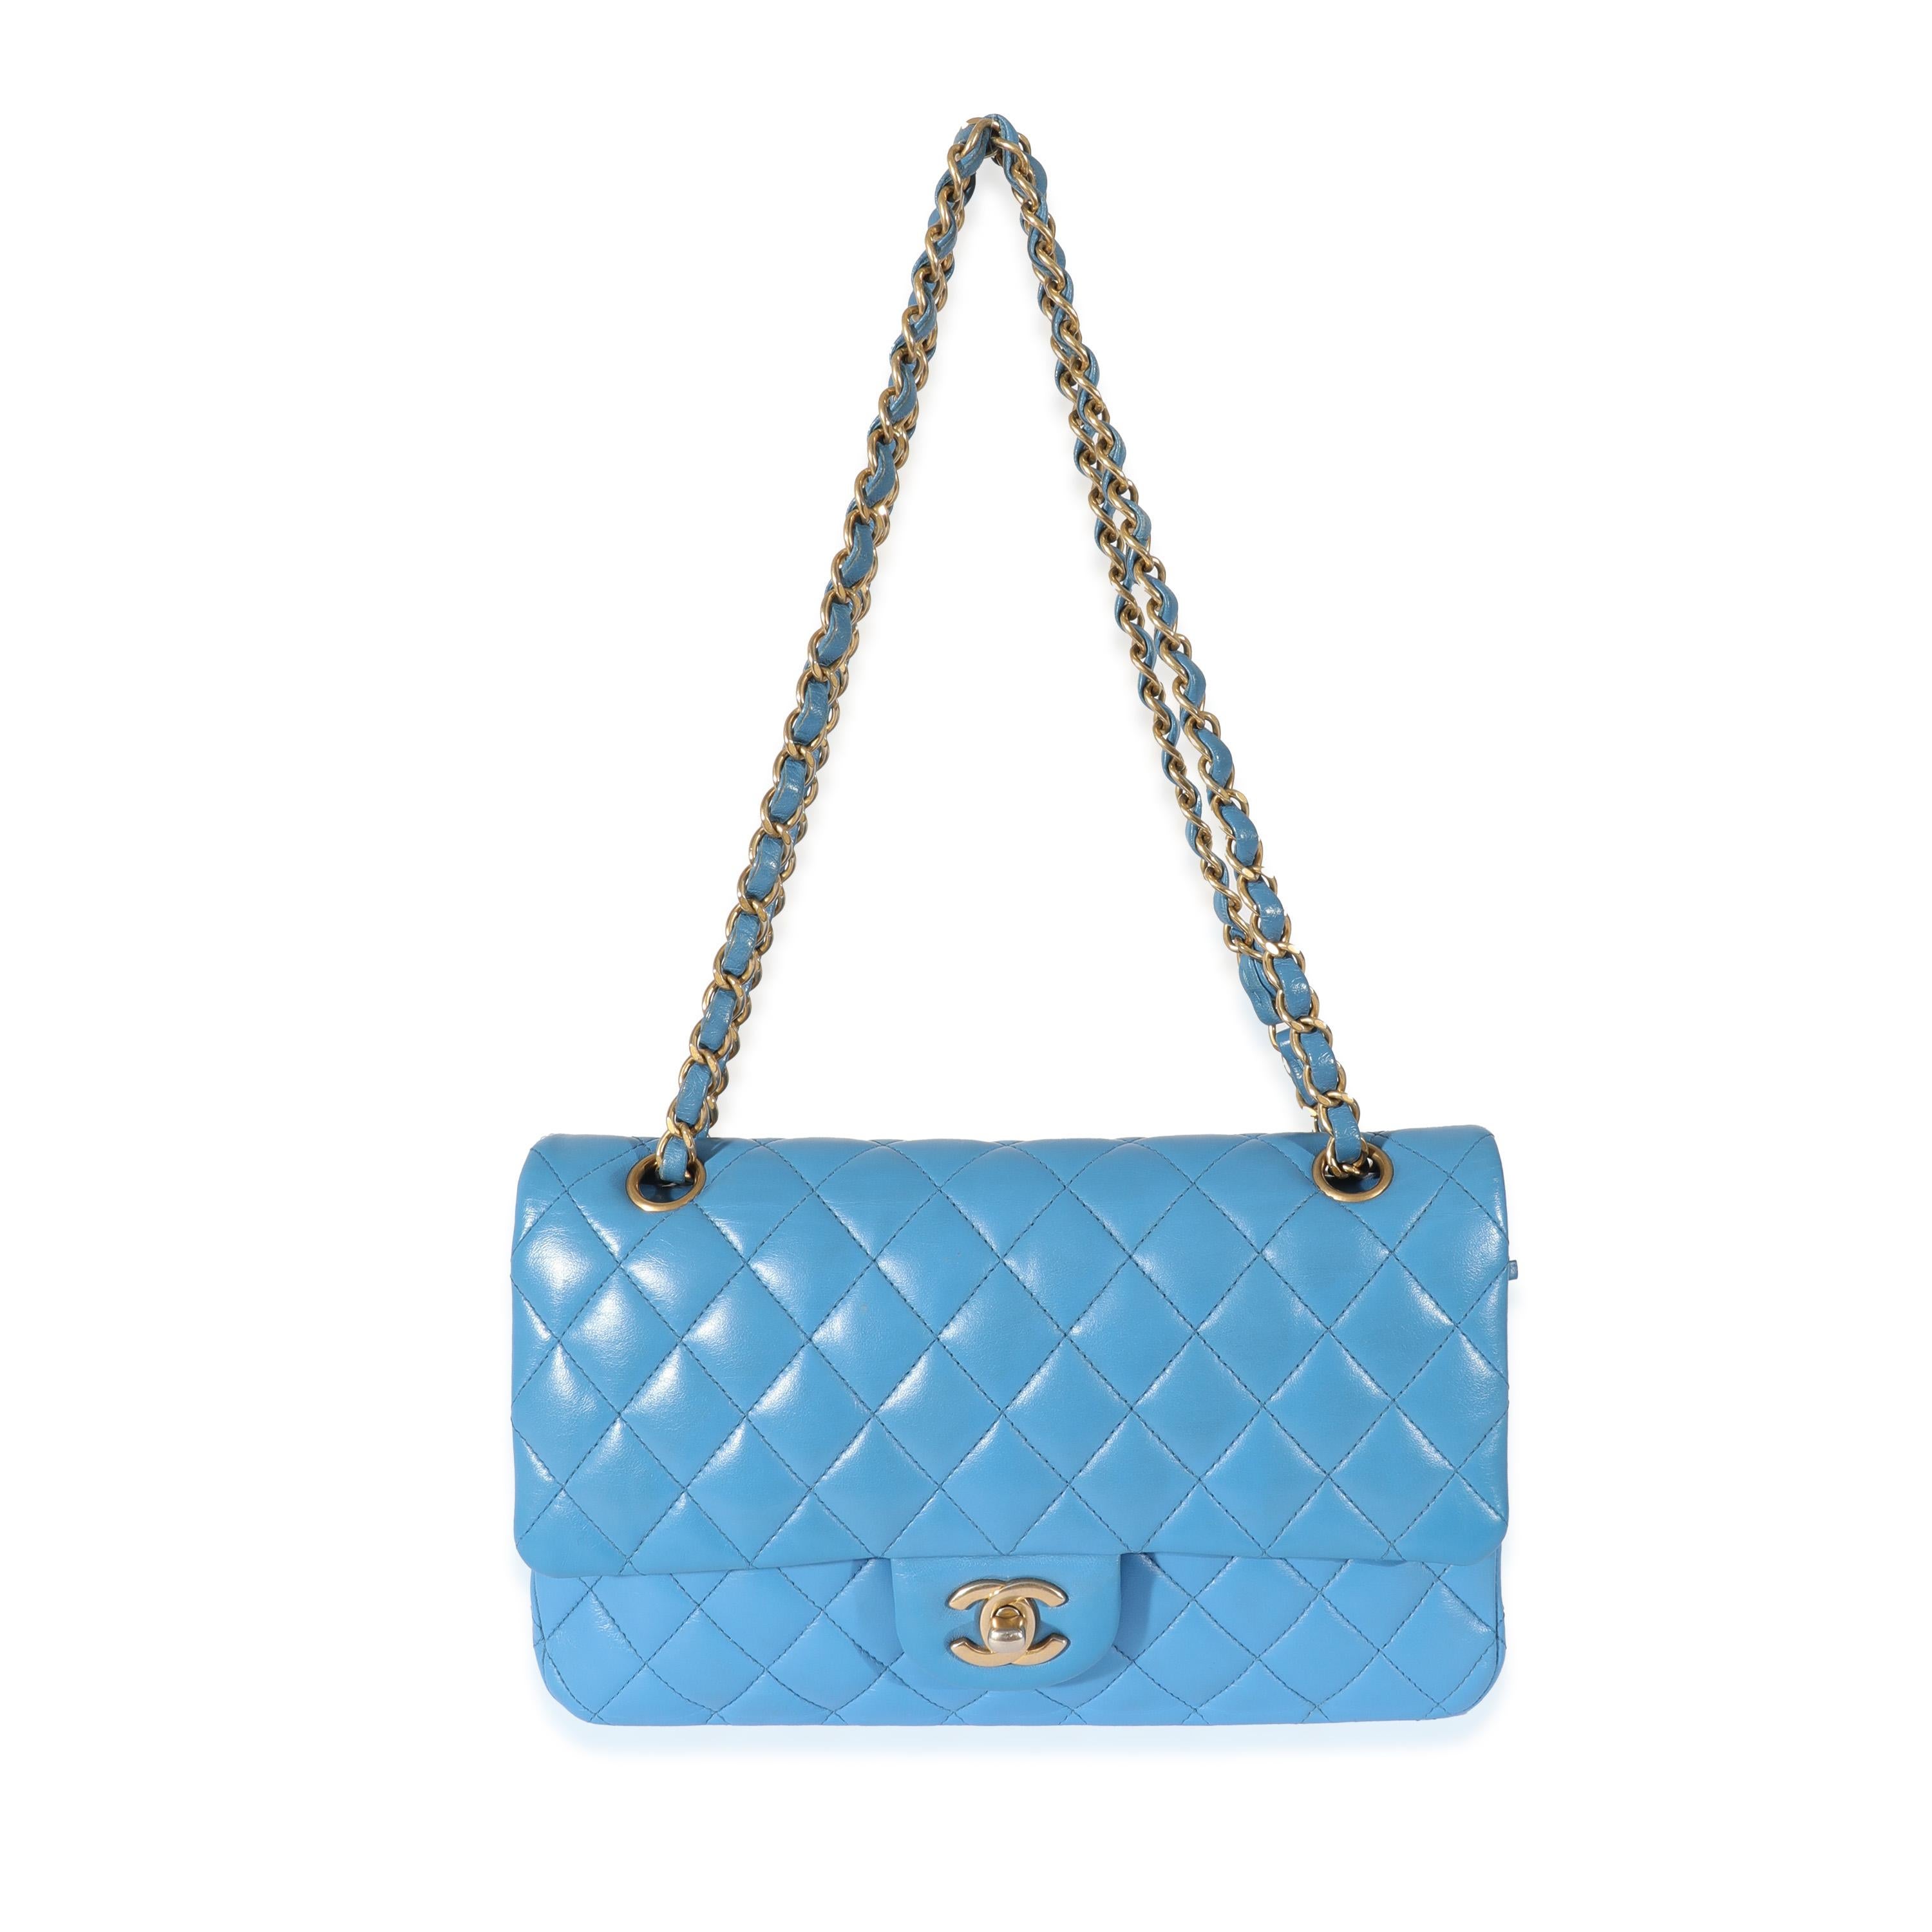 Listing Title: Chanel Lambskin Blue Quilted Medium Double Flap Bag
 SKU: 128242
 MSRP: 8800.00
 Condition: Pre-owned 
 Condition Description: A timeless classic that never goes out of style, the flap bag from Chanel dates back to 1955 and has seen a